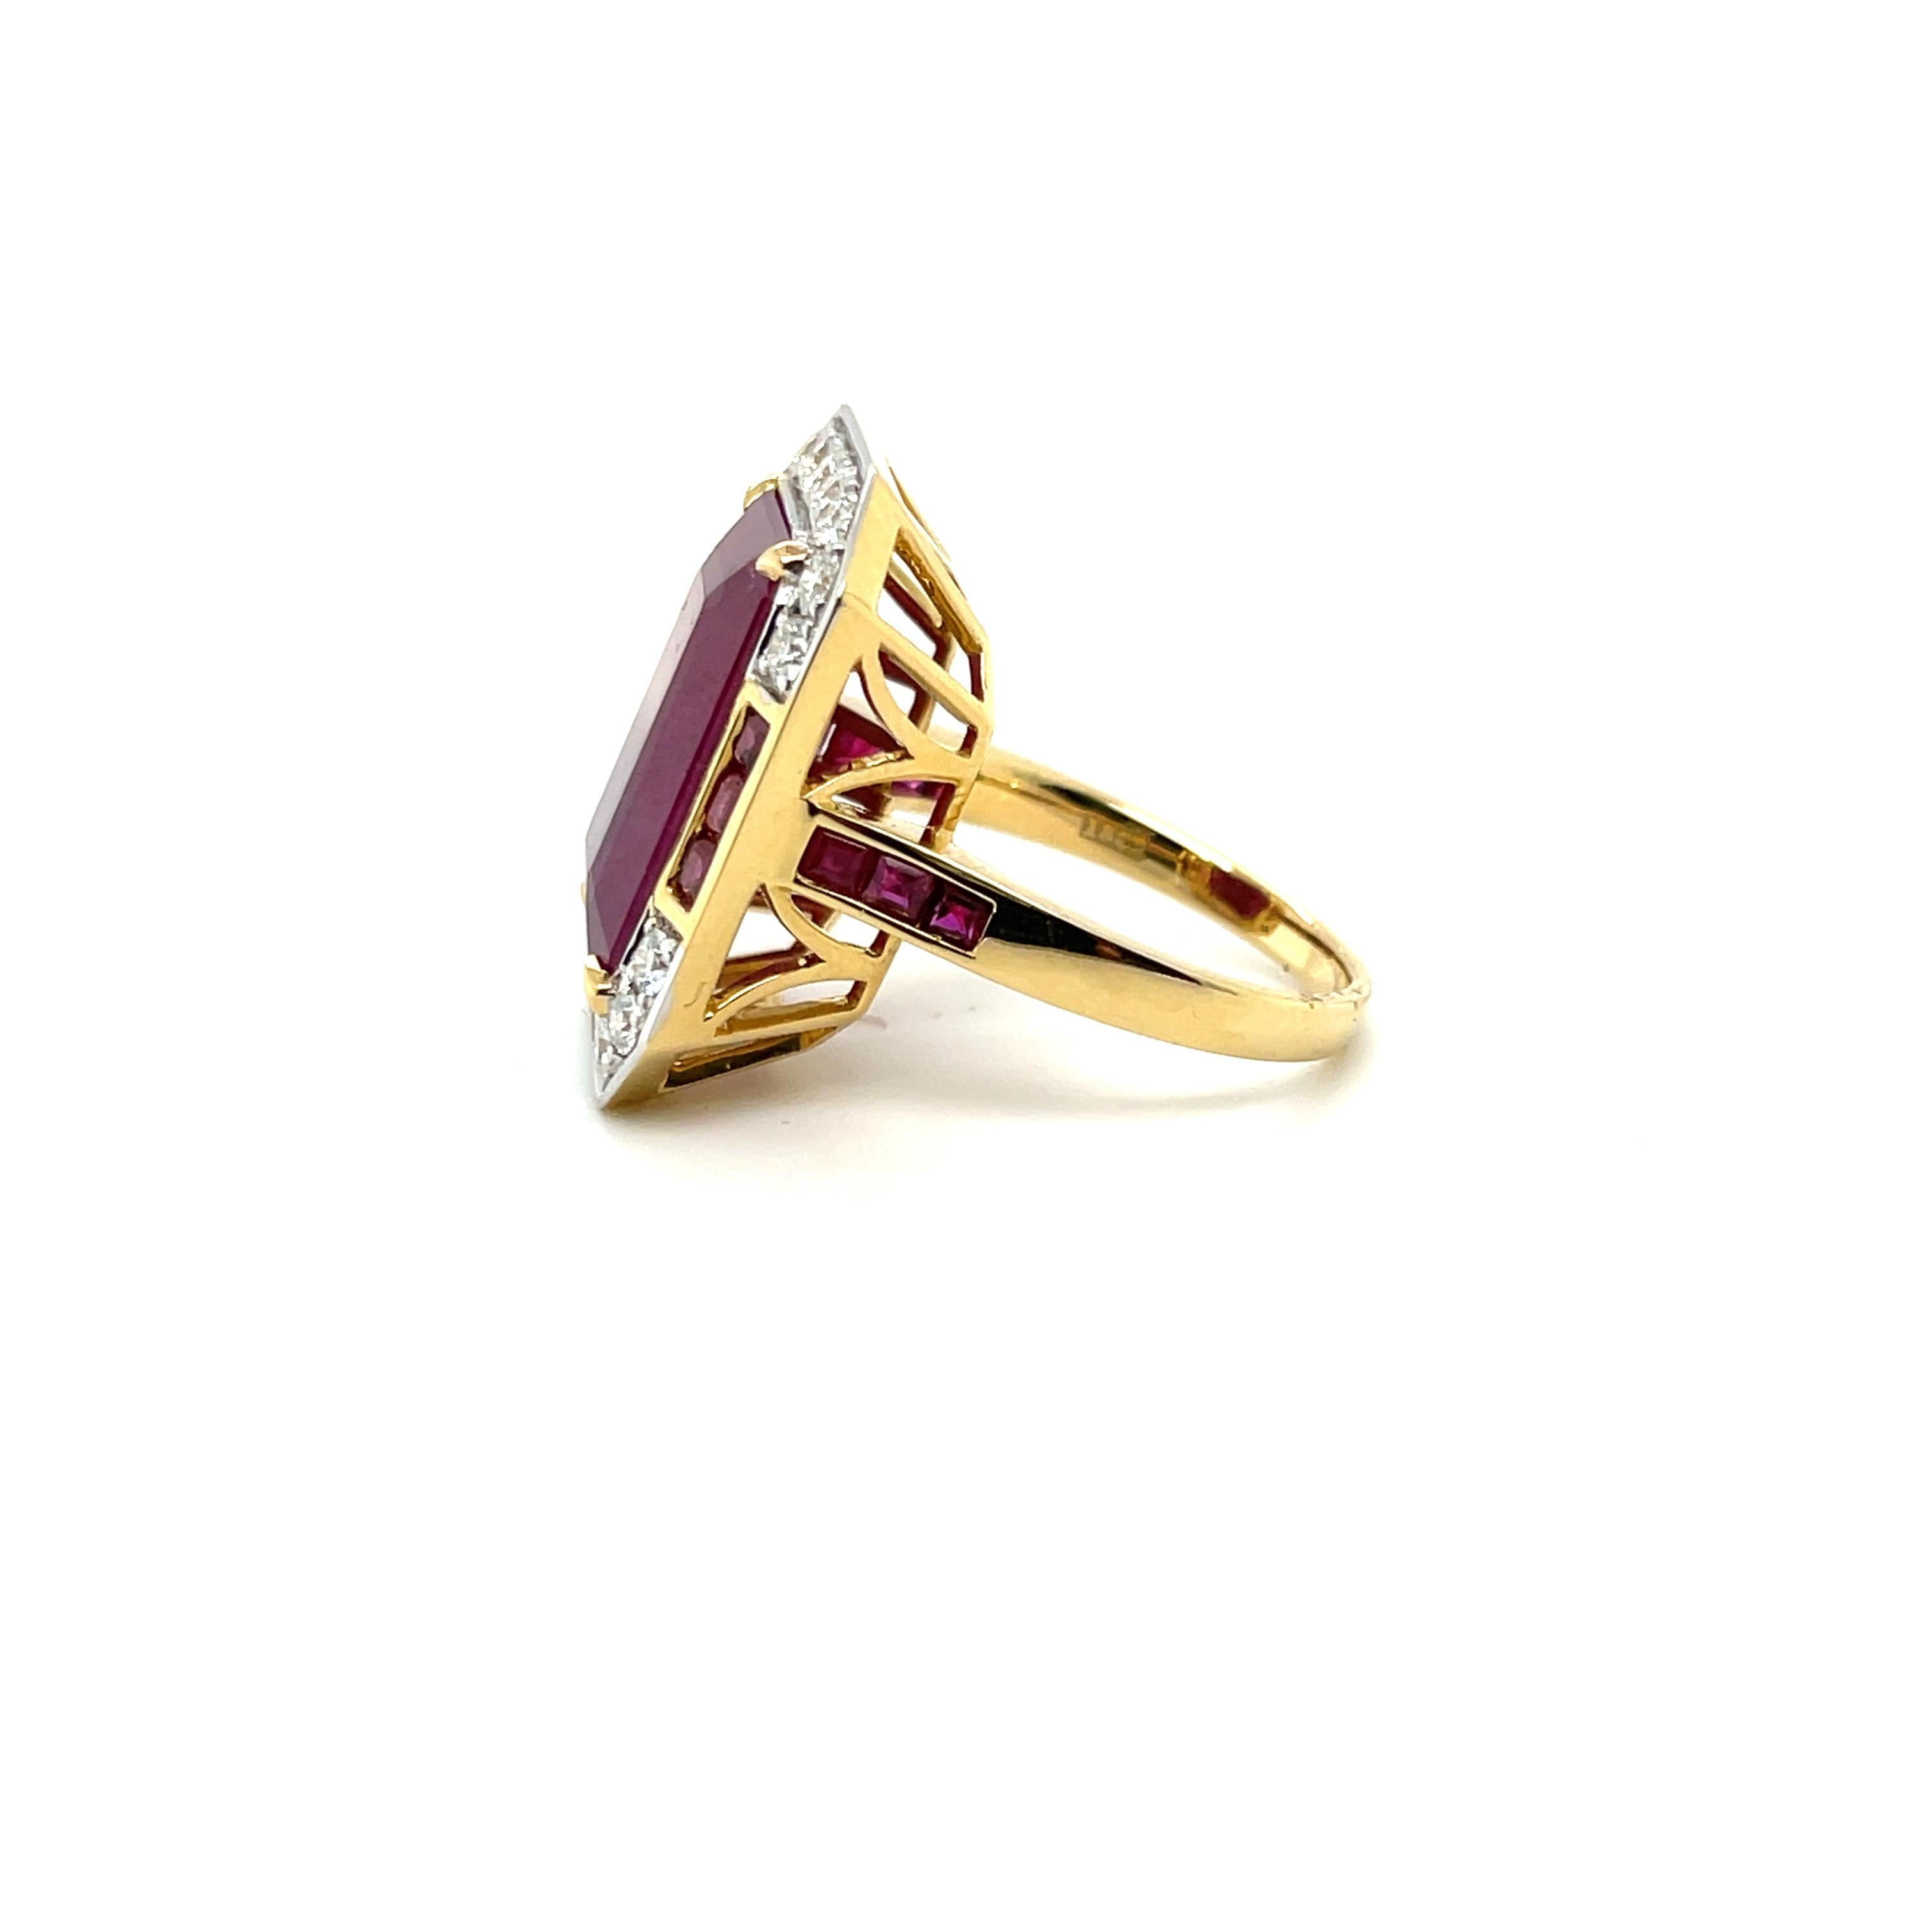 Gorgeous Ruby and Diamond ring , beautifully crafted in eighteen karat yellow gold , complimented by a stunning polished finish design. 

One ladies - 18ct yellow gold dress ring, narrow, low half round, tapered shank with open
back, 4 claw setting